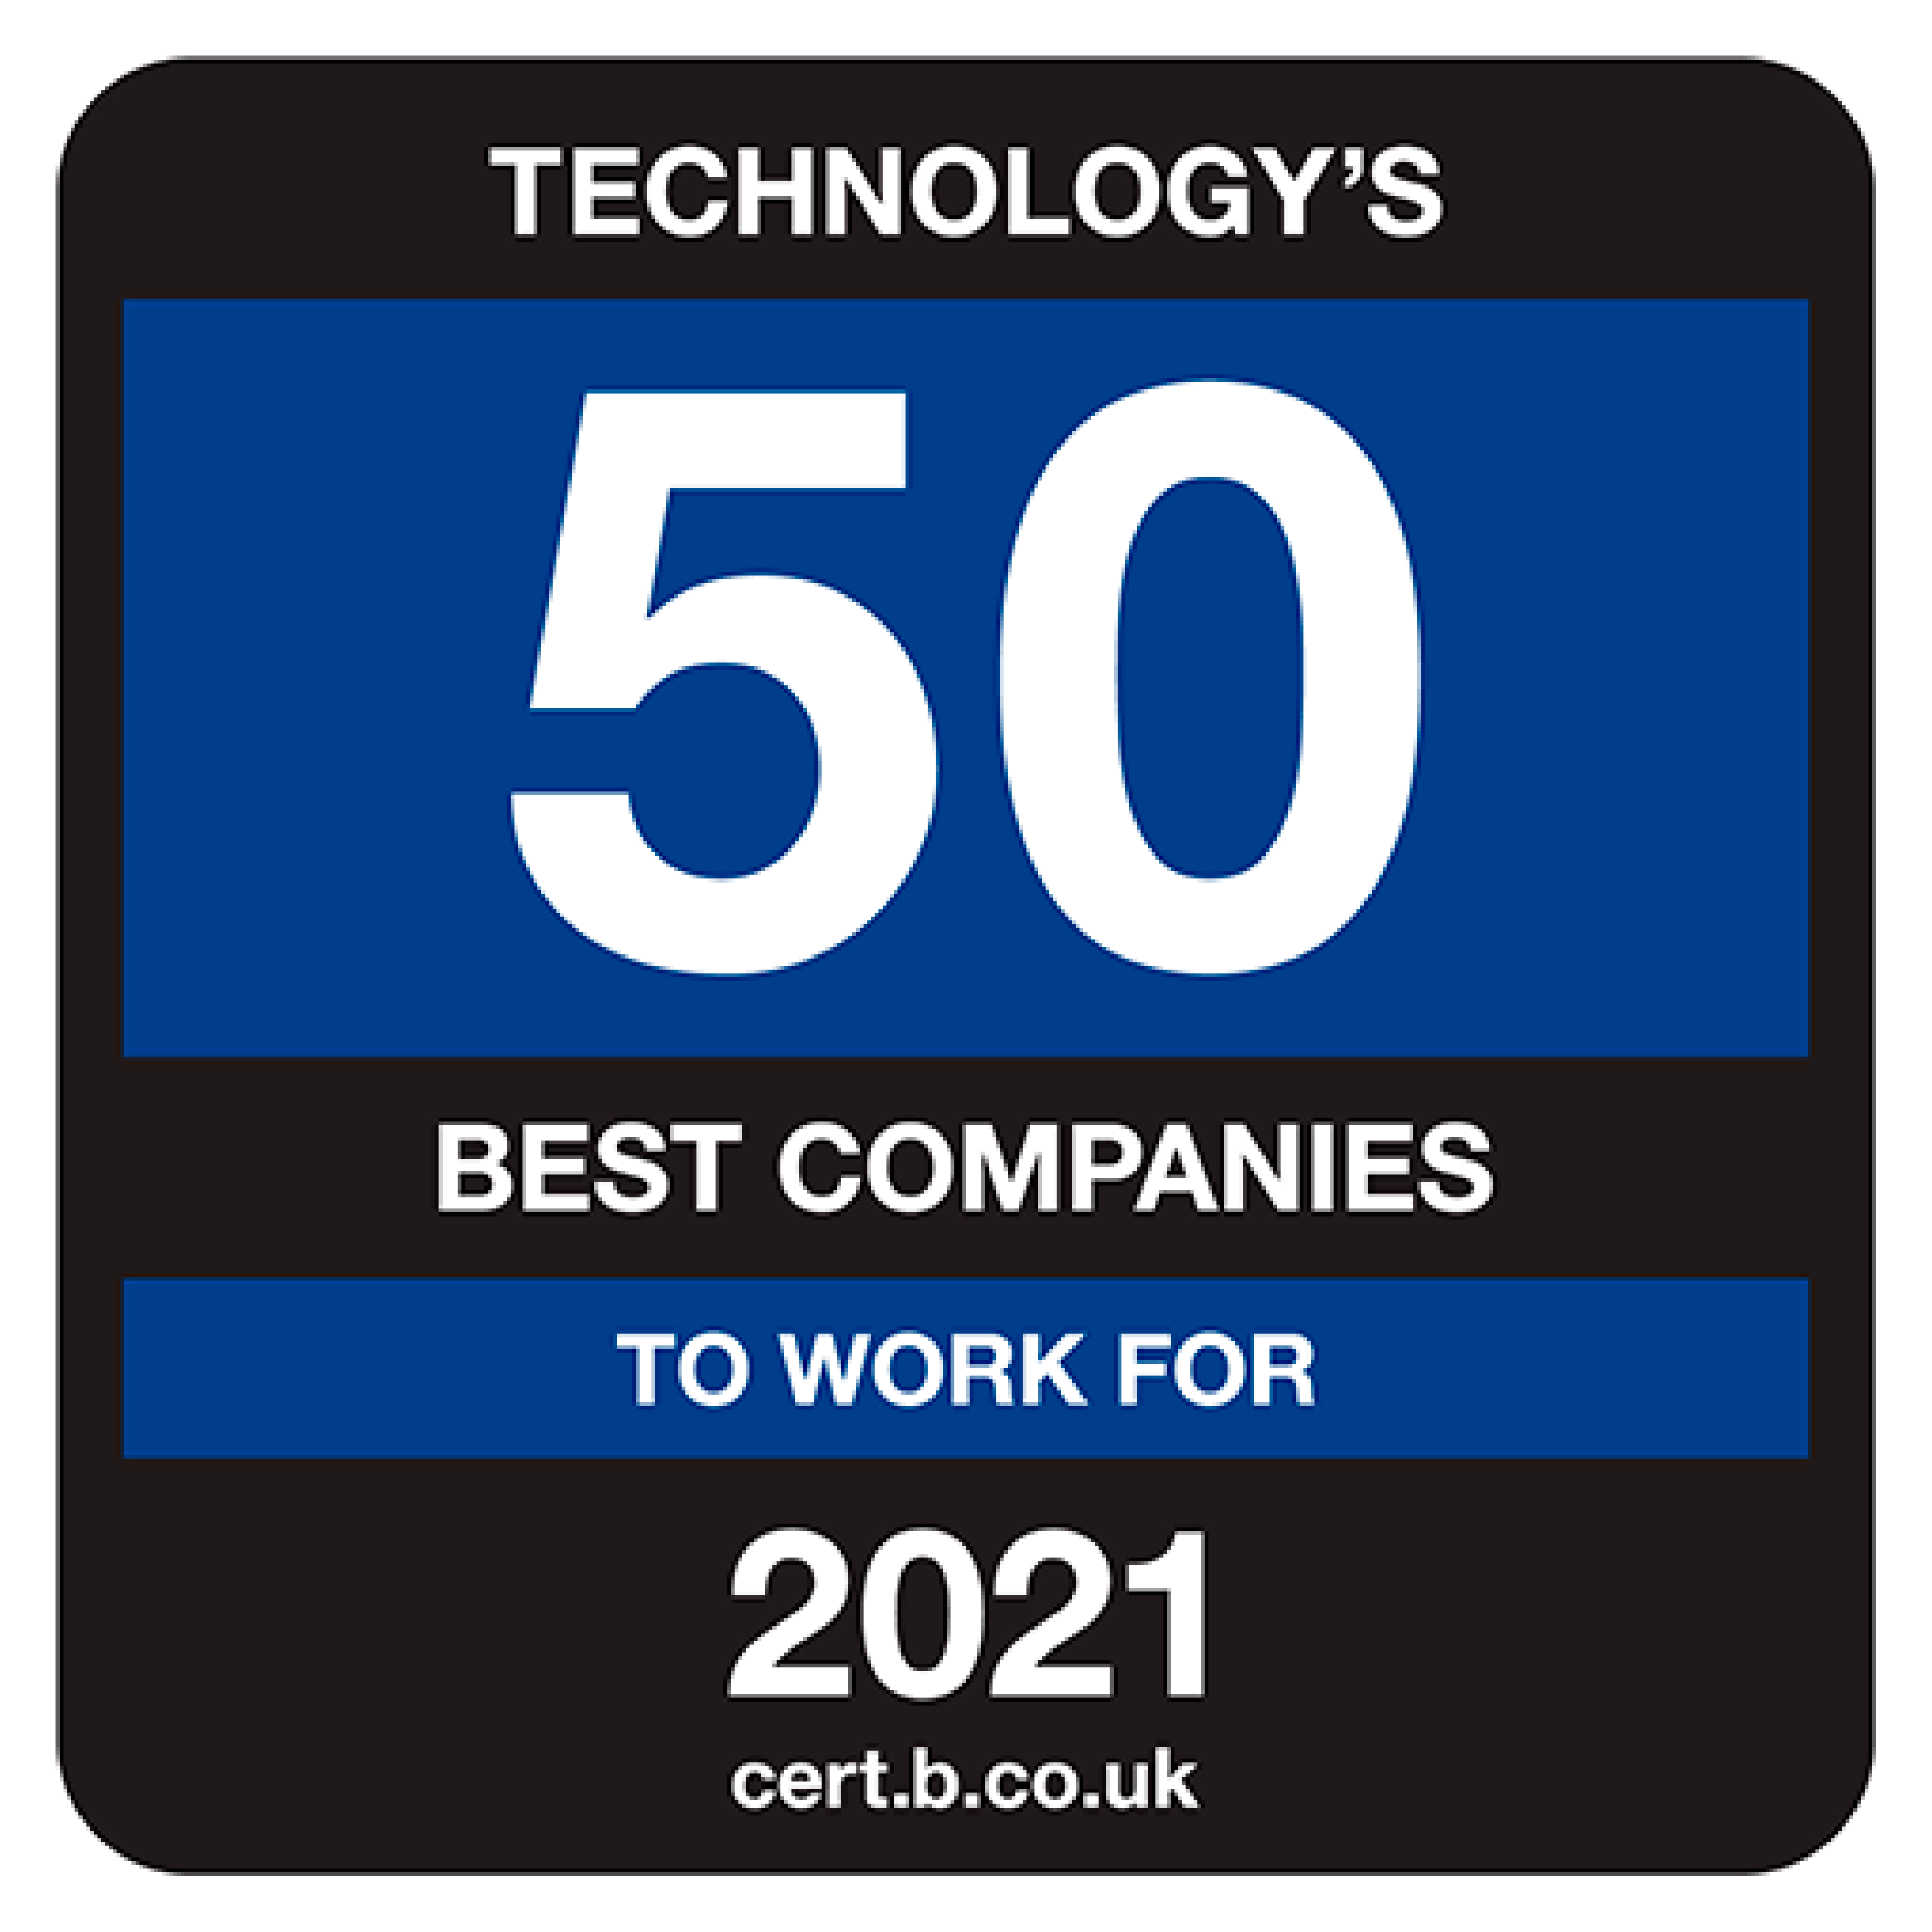 Cert.b.co.uk technology's 50 best companies to work for in 2021.